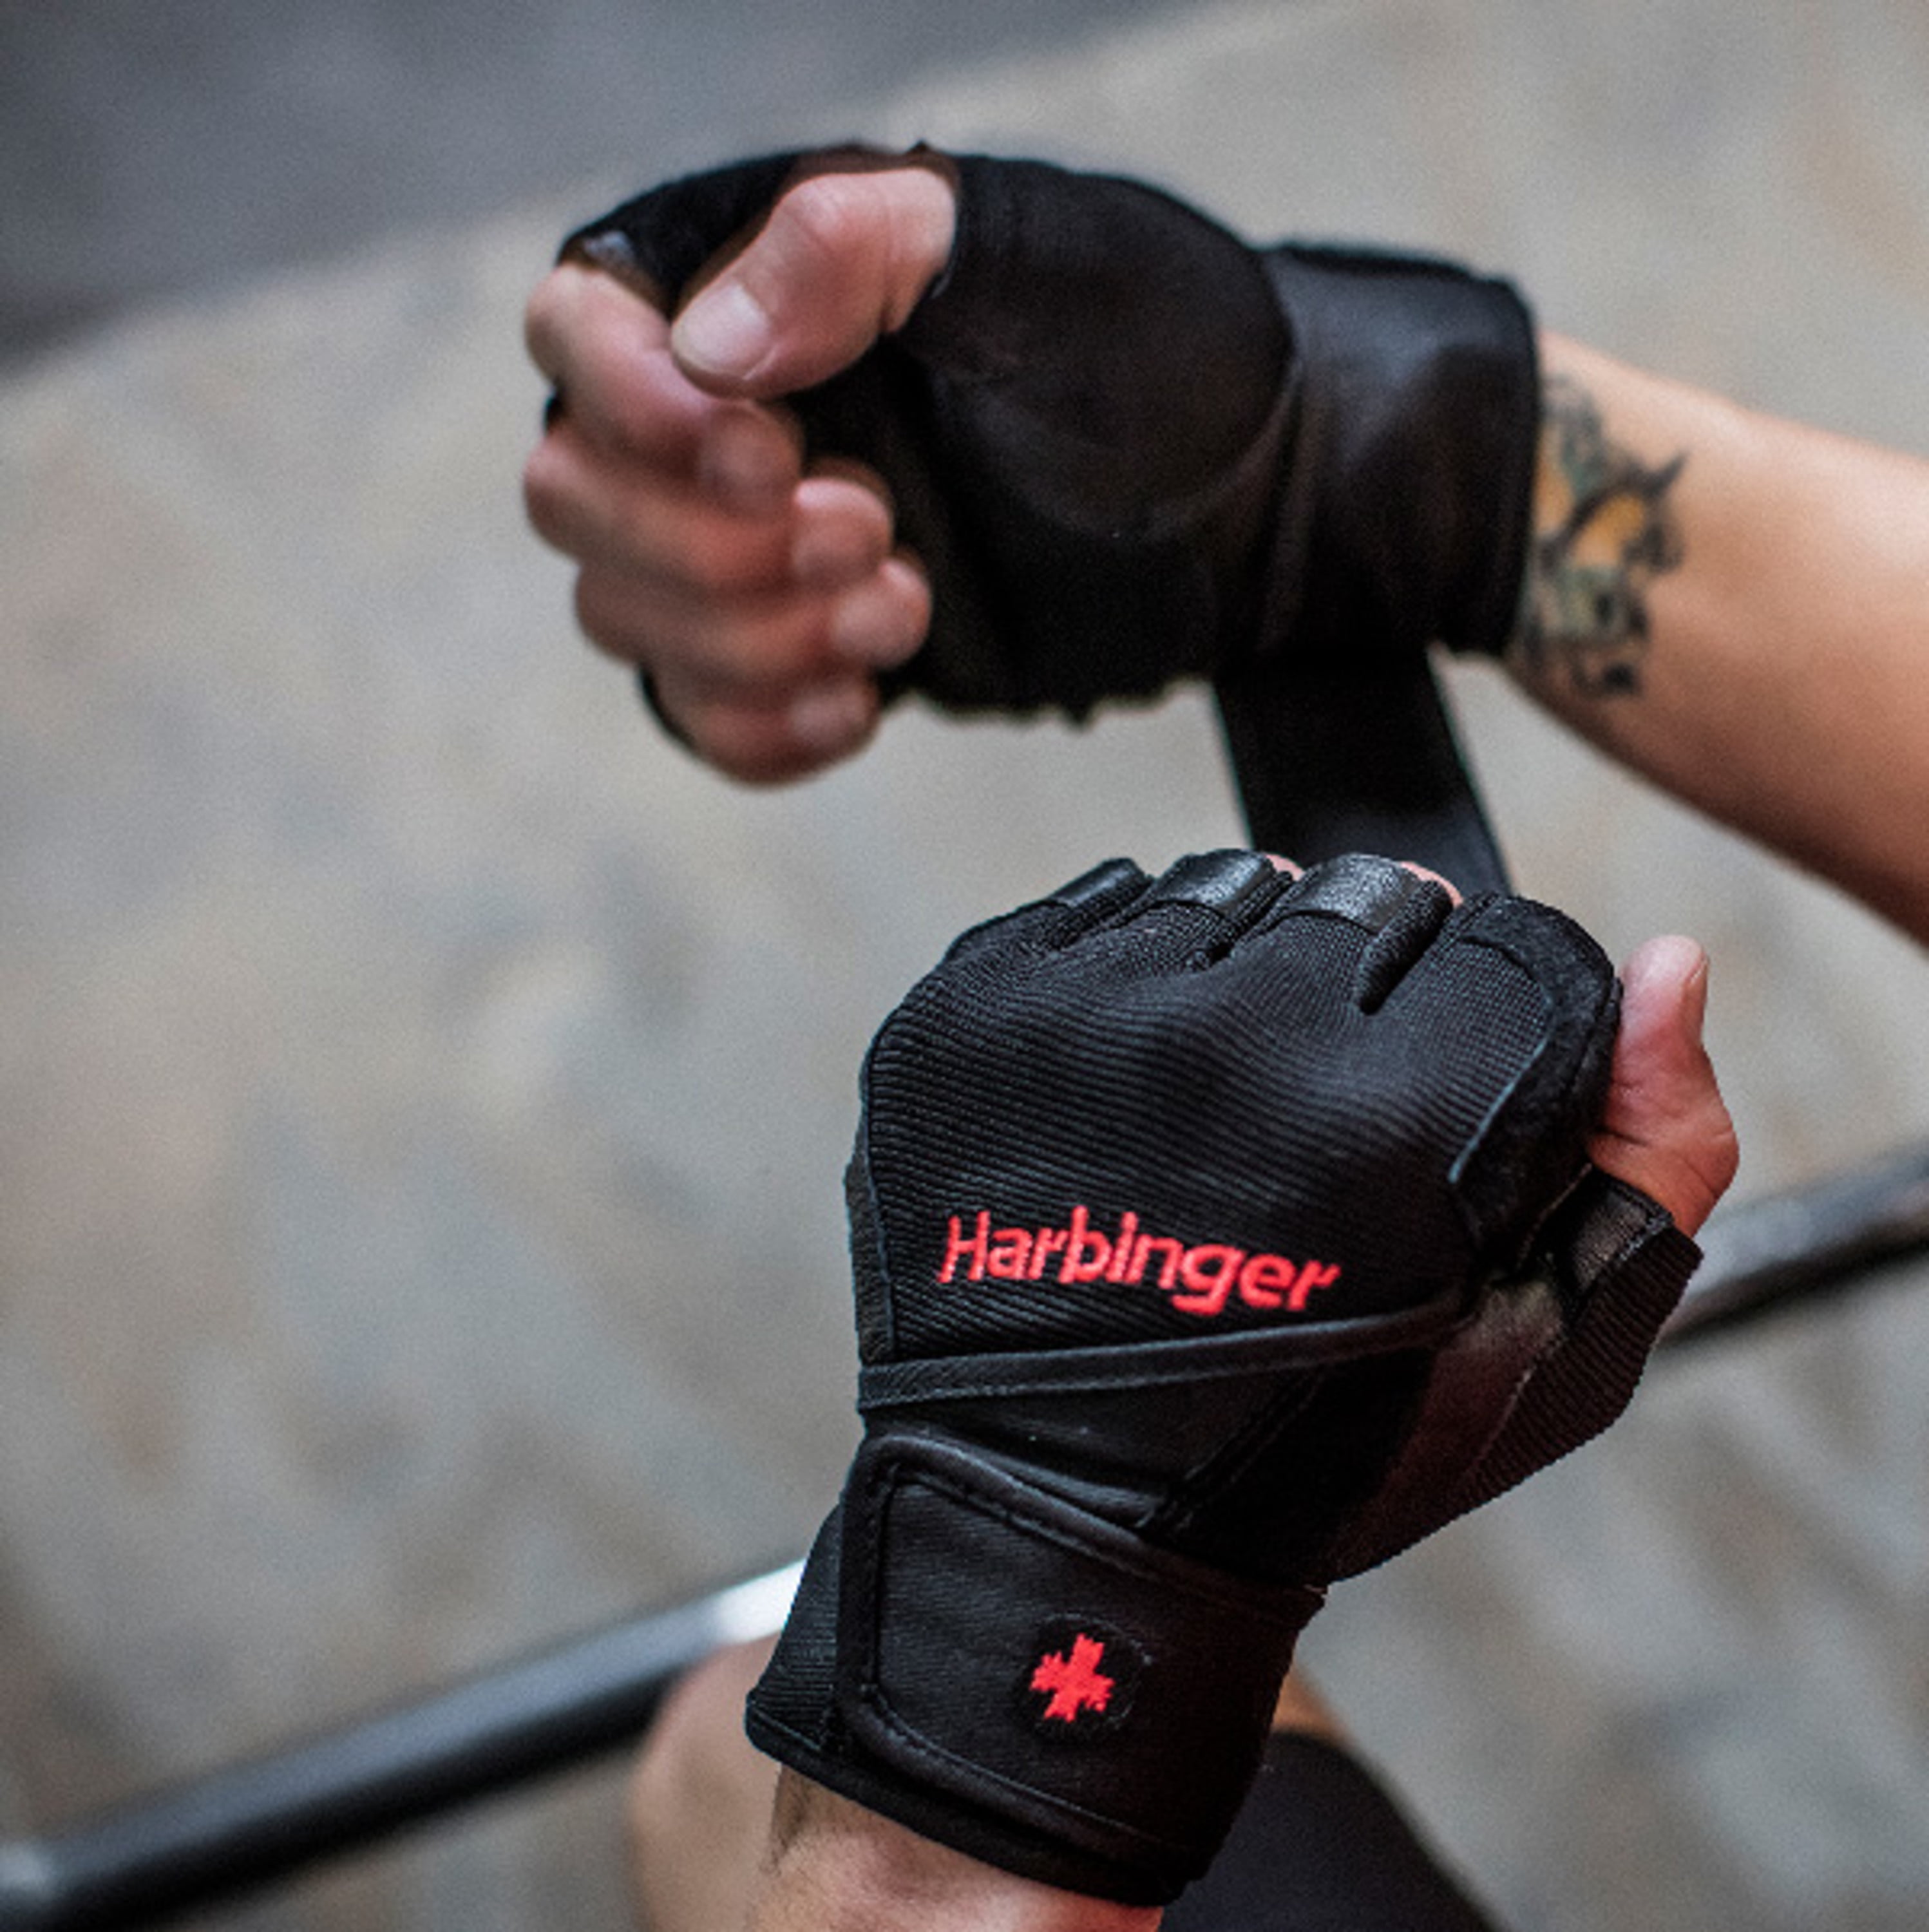 Harbinger Pro Wrist Wrap Weight leather lifting Gloves for gym fitness training 